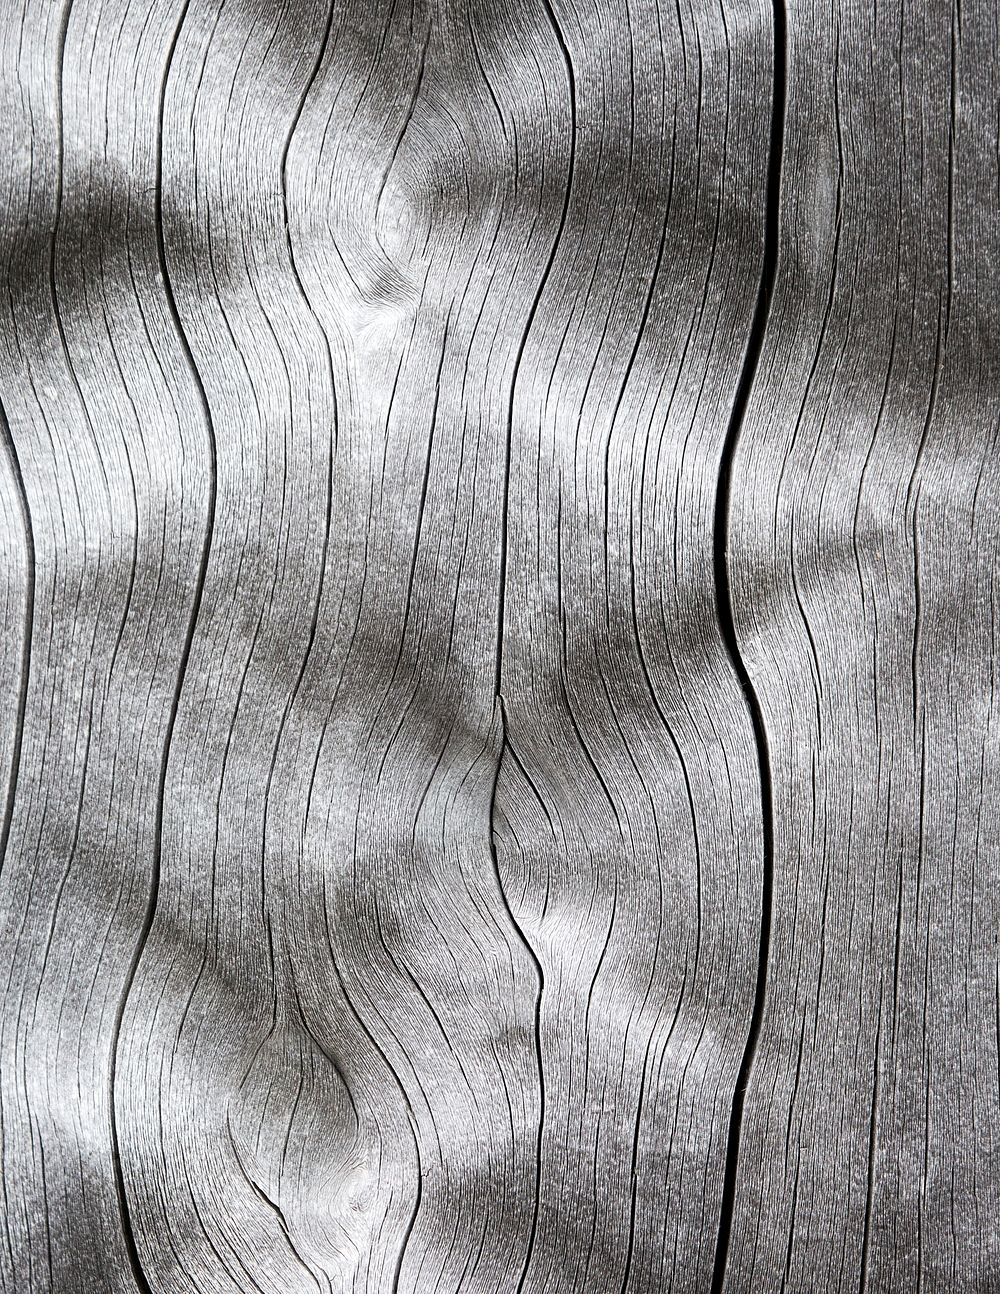 Drift wood texture close up background, abstract design